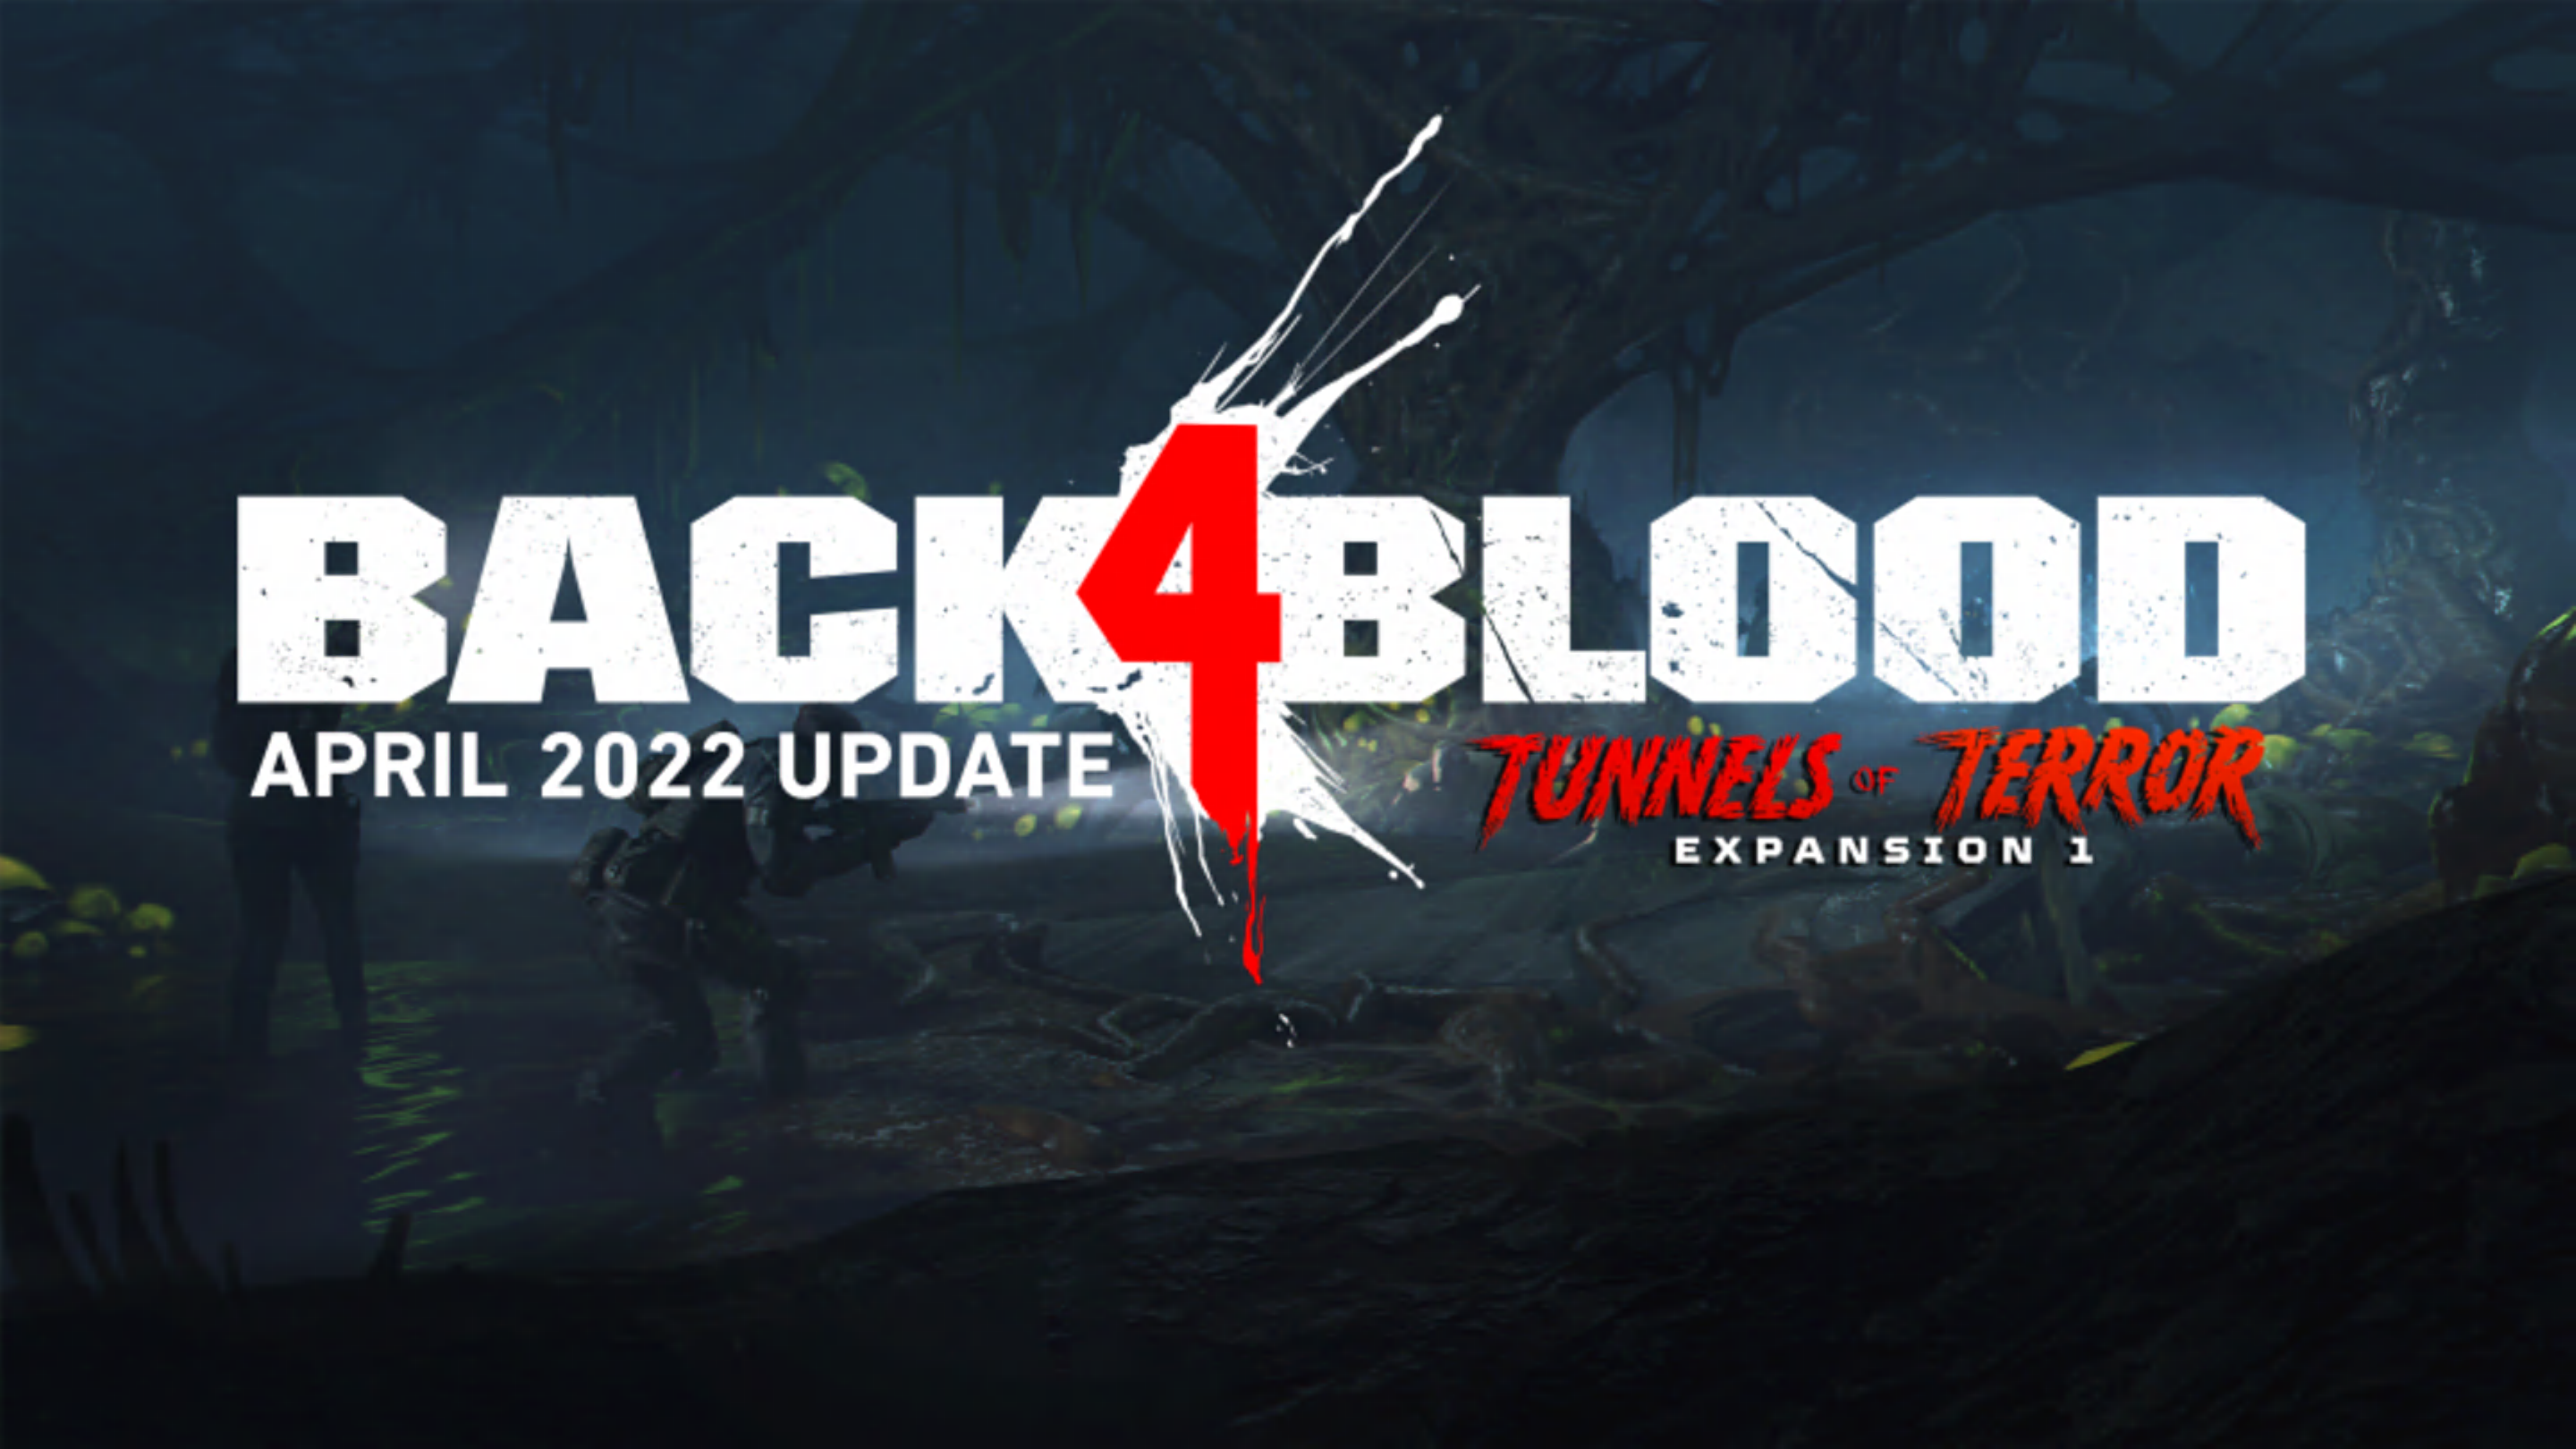 Turtle Rock Studios Offer First Look At Back 4 Blood Expansion 3 - Gameranx